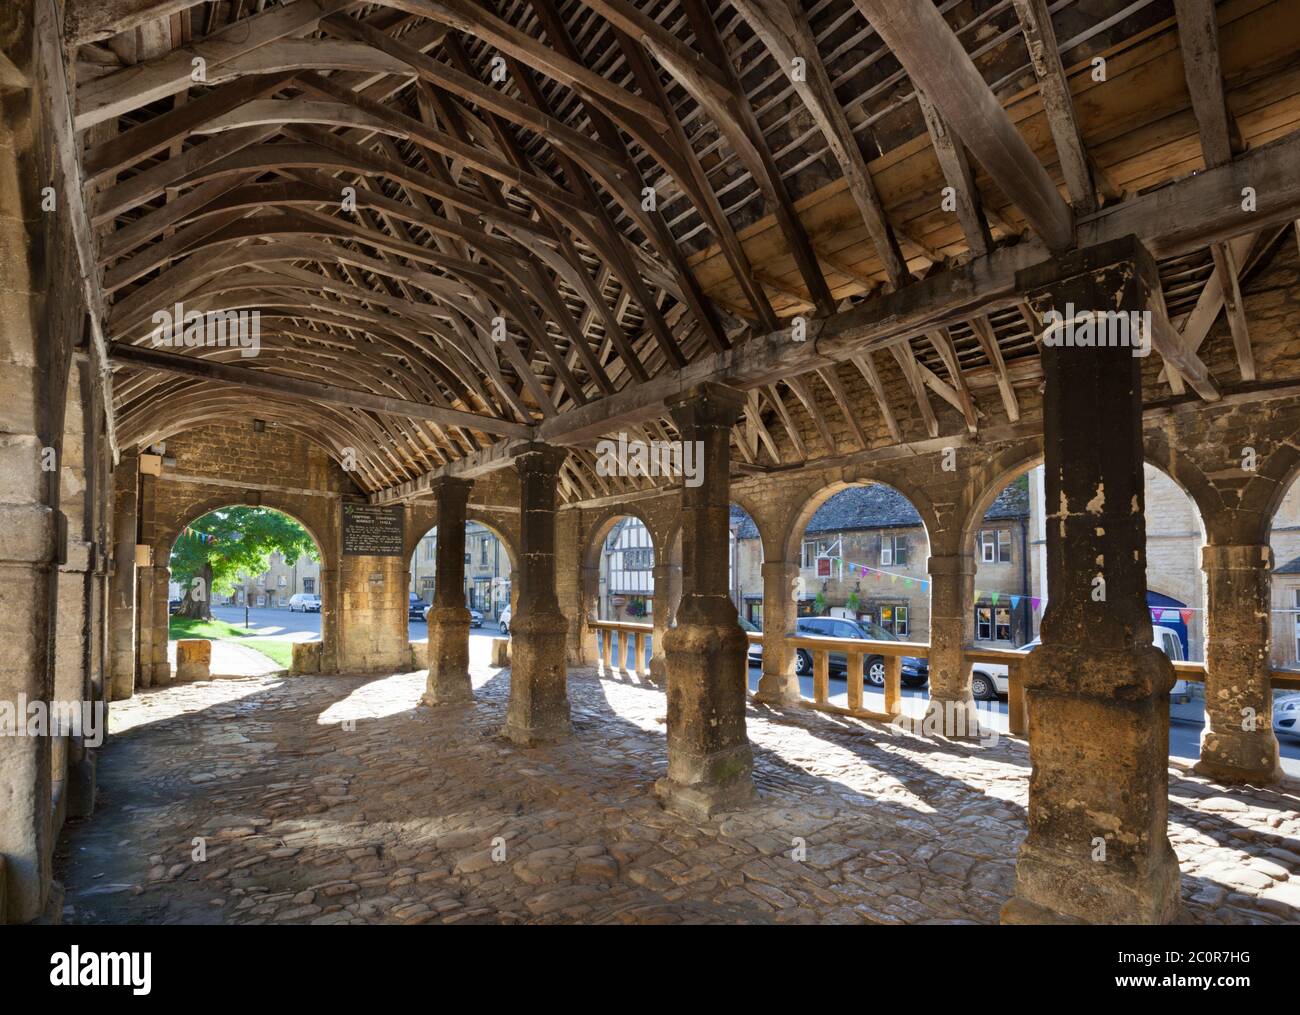 The Market Hall dating from 1627, Chipping Campden, Cotswolds, Gloucestershire, England, United Kingdom Stock Photo